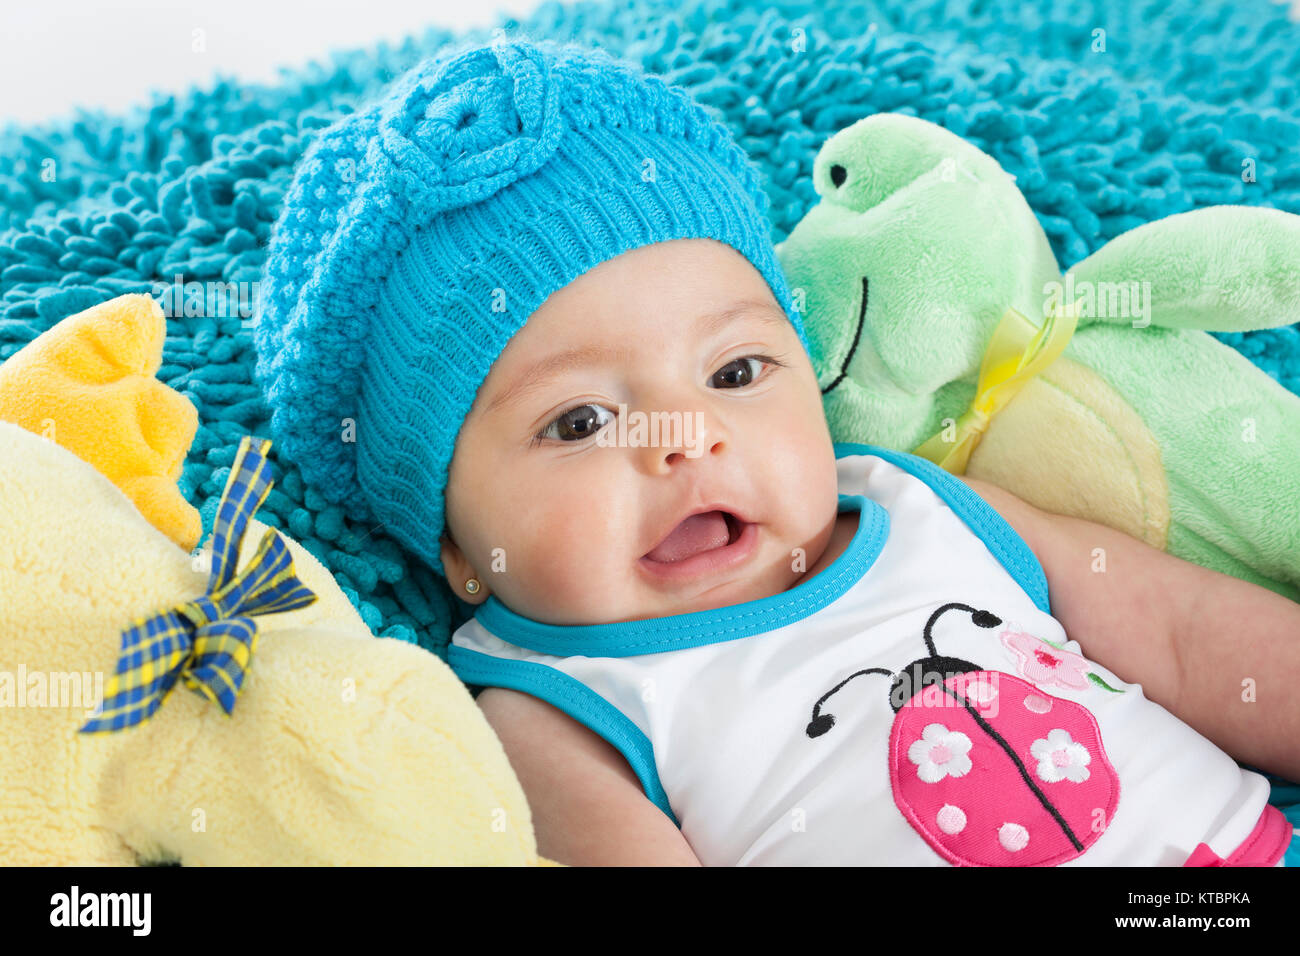 Four months old baby girl wearing a blue cap Stock Photo